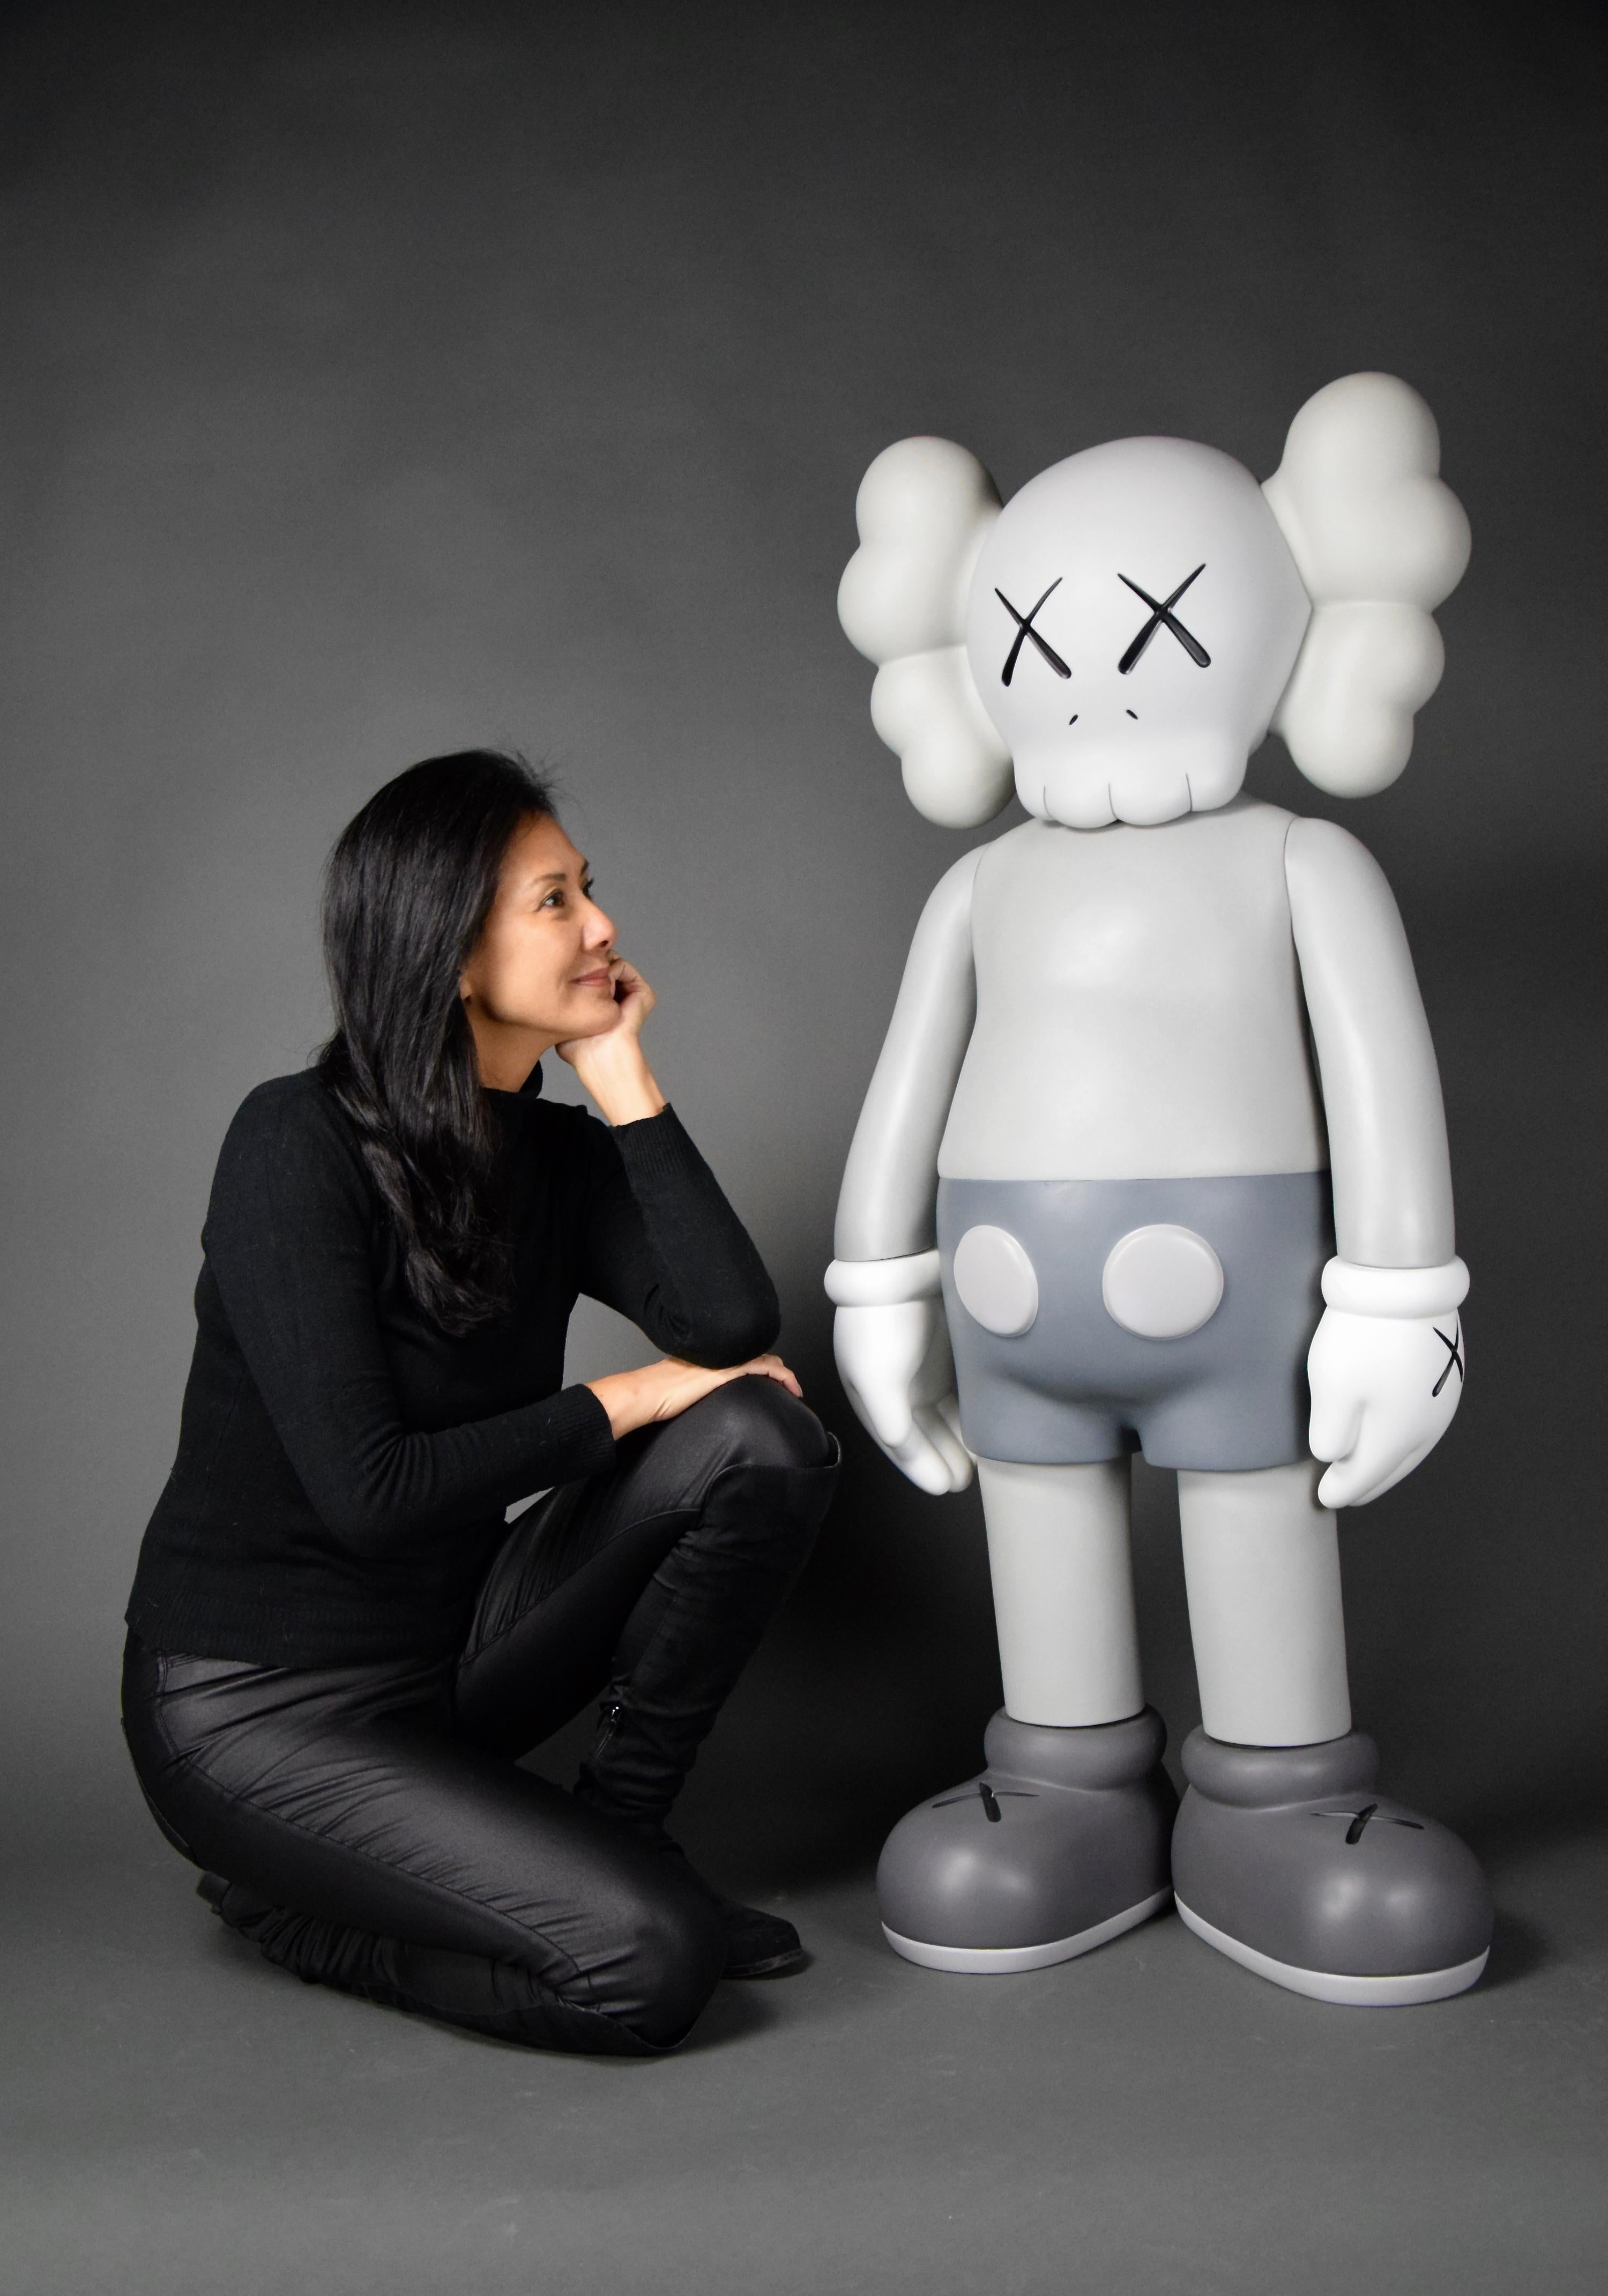 Kaws Companion XXL painted cast vinyl. Stamped : MEDICOM TOY 2007 © KAWS ..07.
Companion is in perfect condition. We will ship this beauty insured in a custom made wooden crate.

Brian Donnelly (born November 4, 1974), known professionally as